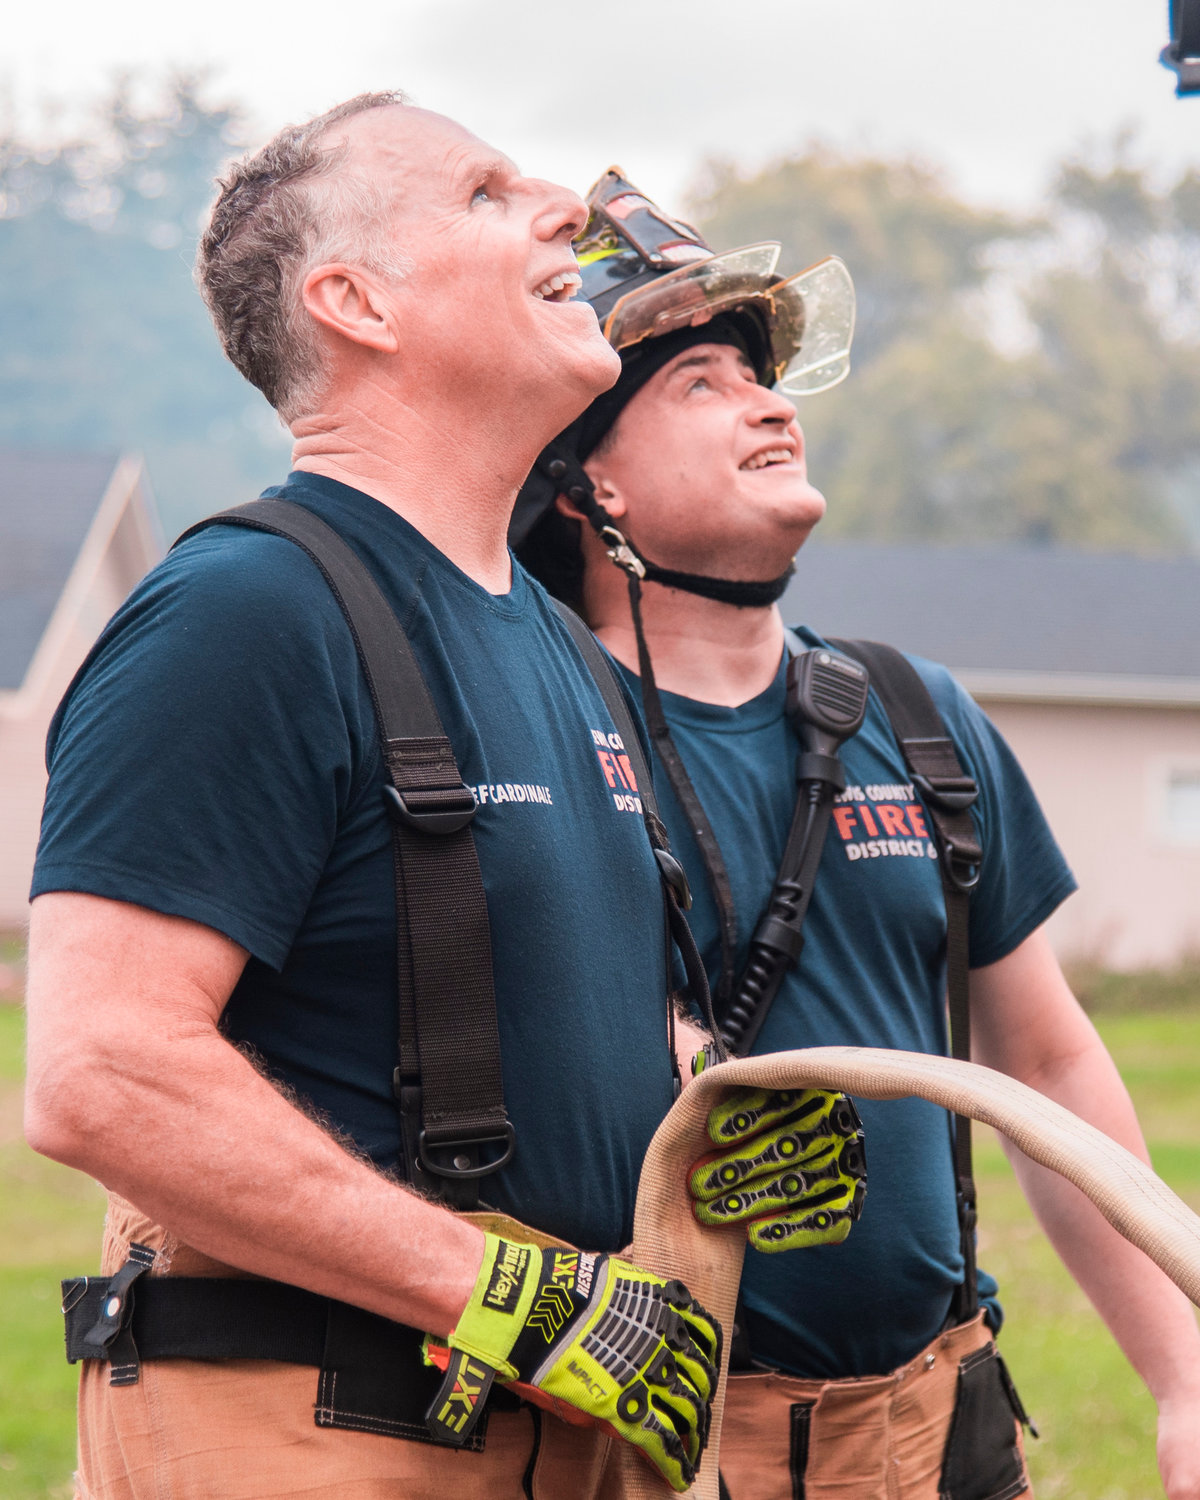 Chief Ken Cardinale, left, and Wyatt “Nutty” Hill, of Lewis County Fire District 6, smile while clearing the scene following a fire in Pe Ell Thursday afternoon.